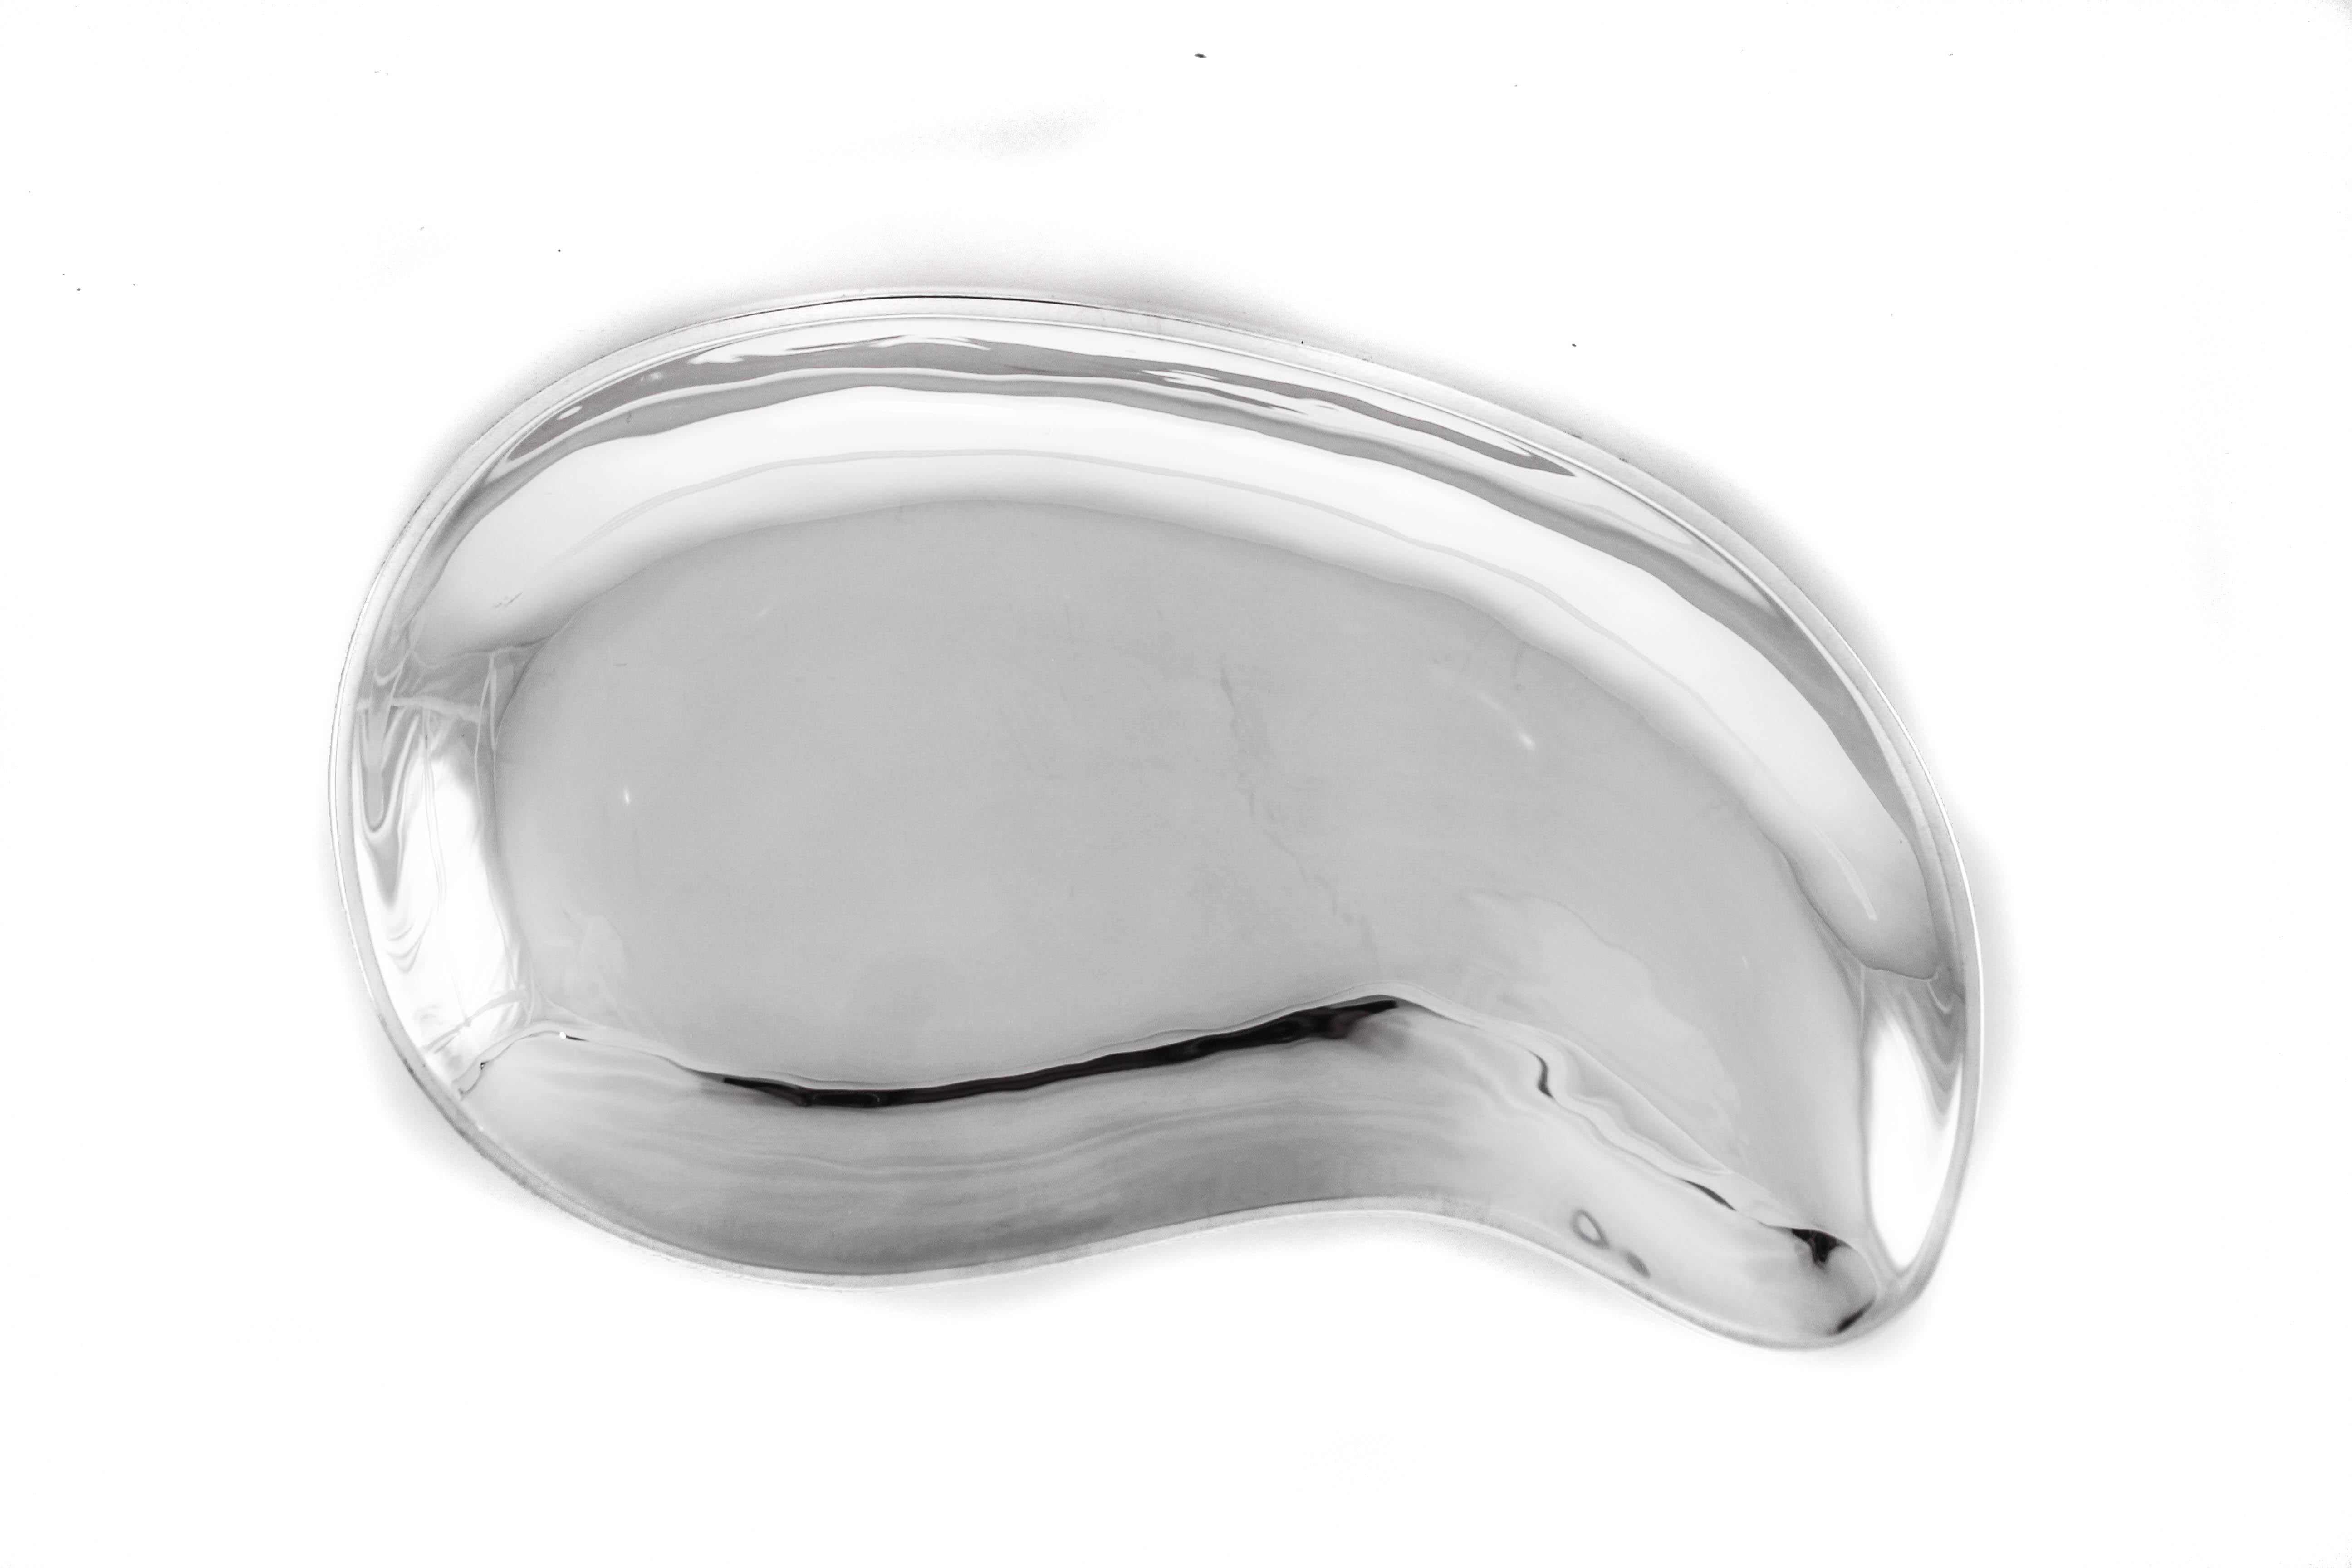 The 1950s was all about abstract and modernism and here we have a perfect example of the two fused together. This sterling silver dish has an abstract shape and is simple with no ornamentation. The modernism period was defined by less and simpler